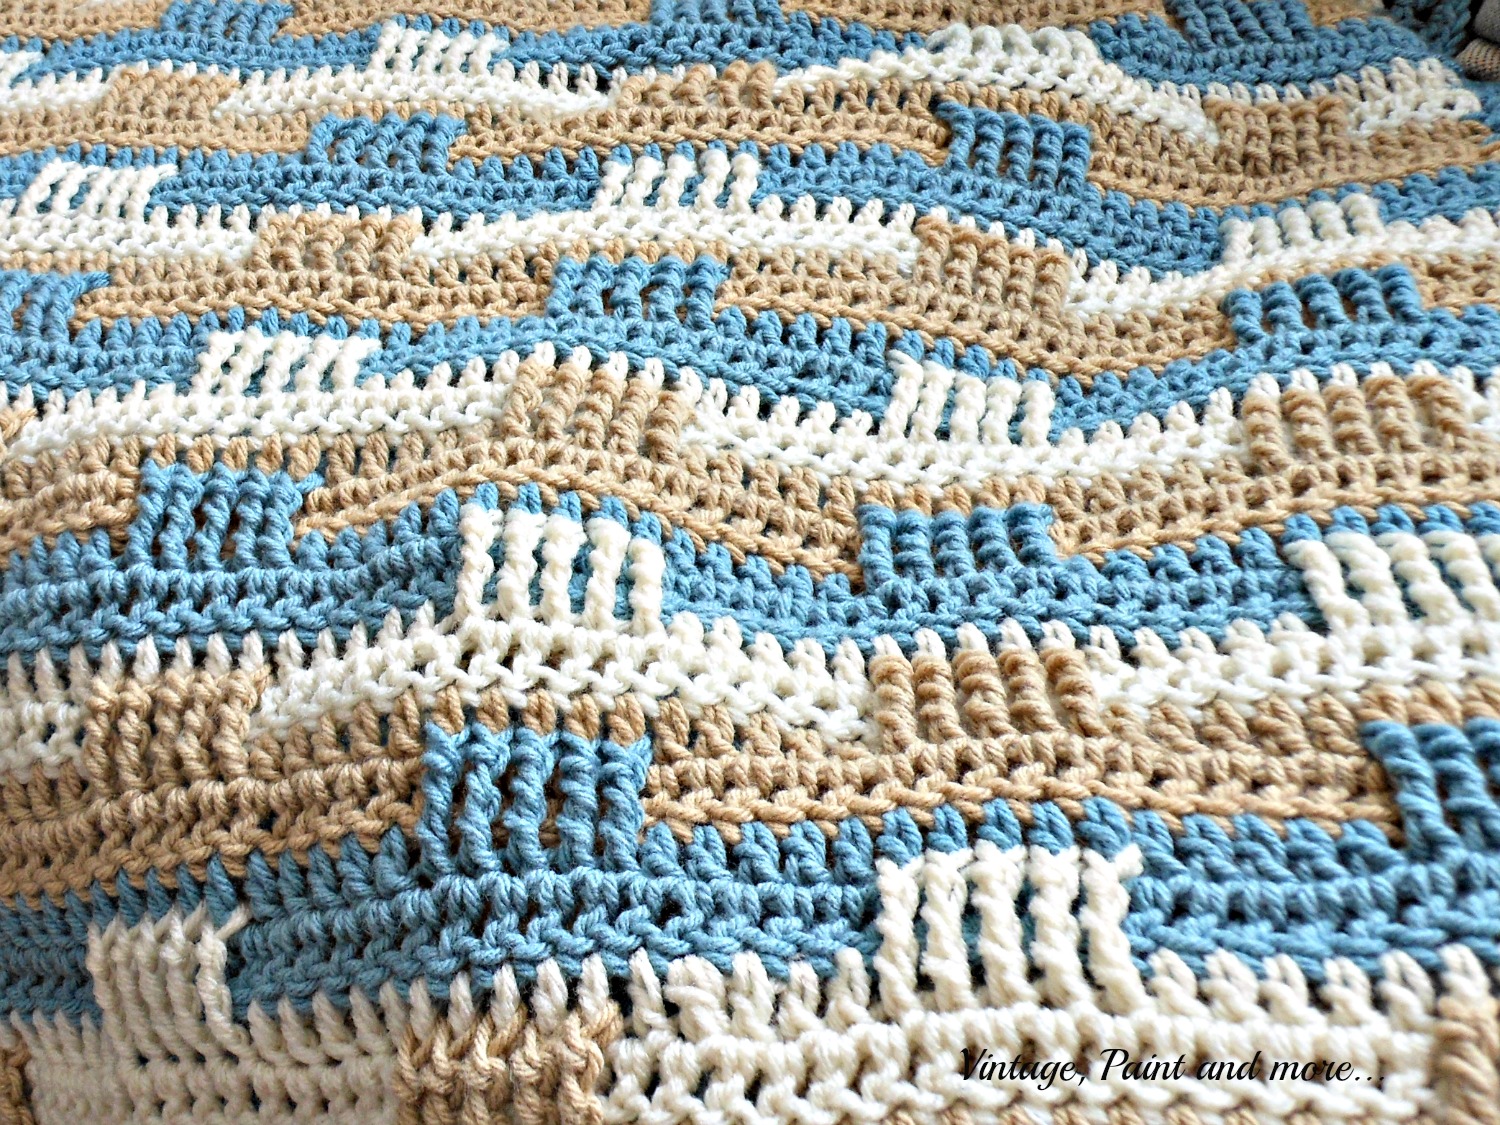 a basket weave pattern used to crochet an afghan